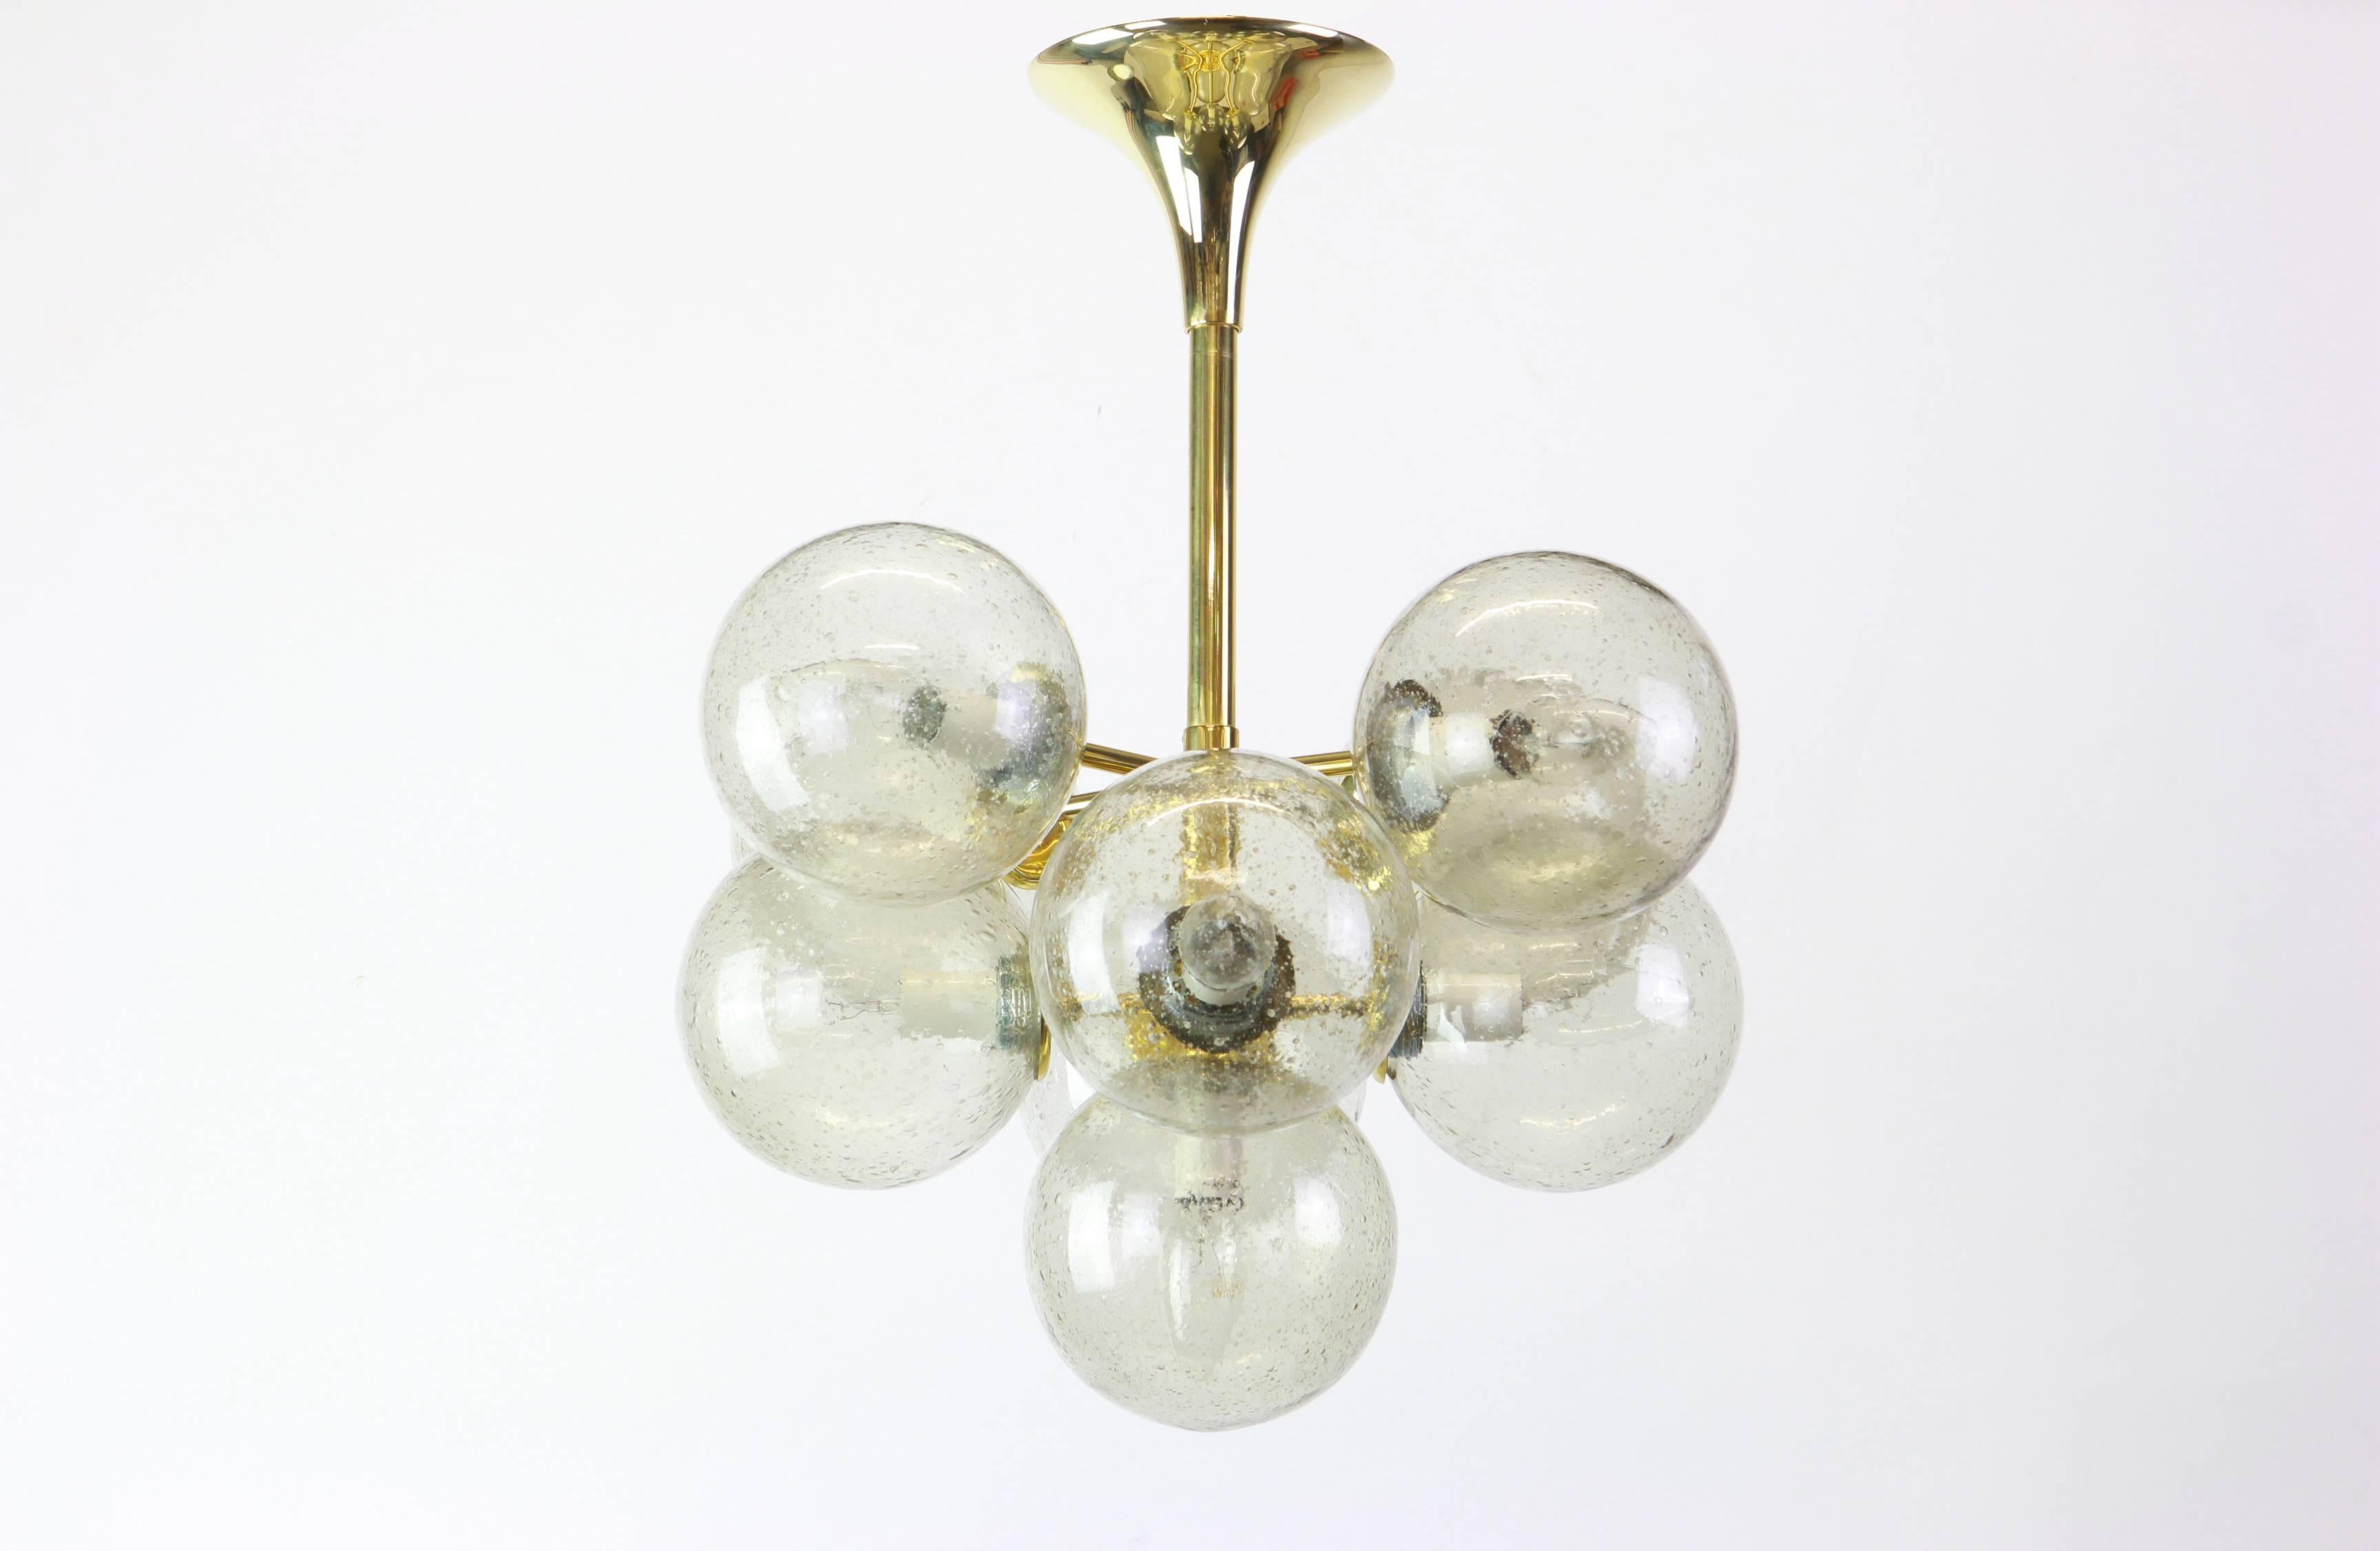 Atomic chandelier with nine-glass globes was designed by the Swiss artist and designer Max Bill for Temde Leuchten. The globes are hand blown and fitted with a screwing device.

High quality and in very good condition. Cleaned, well-wired and ready